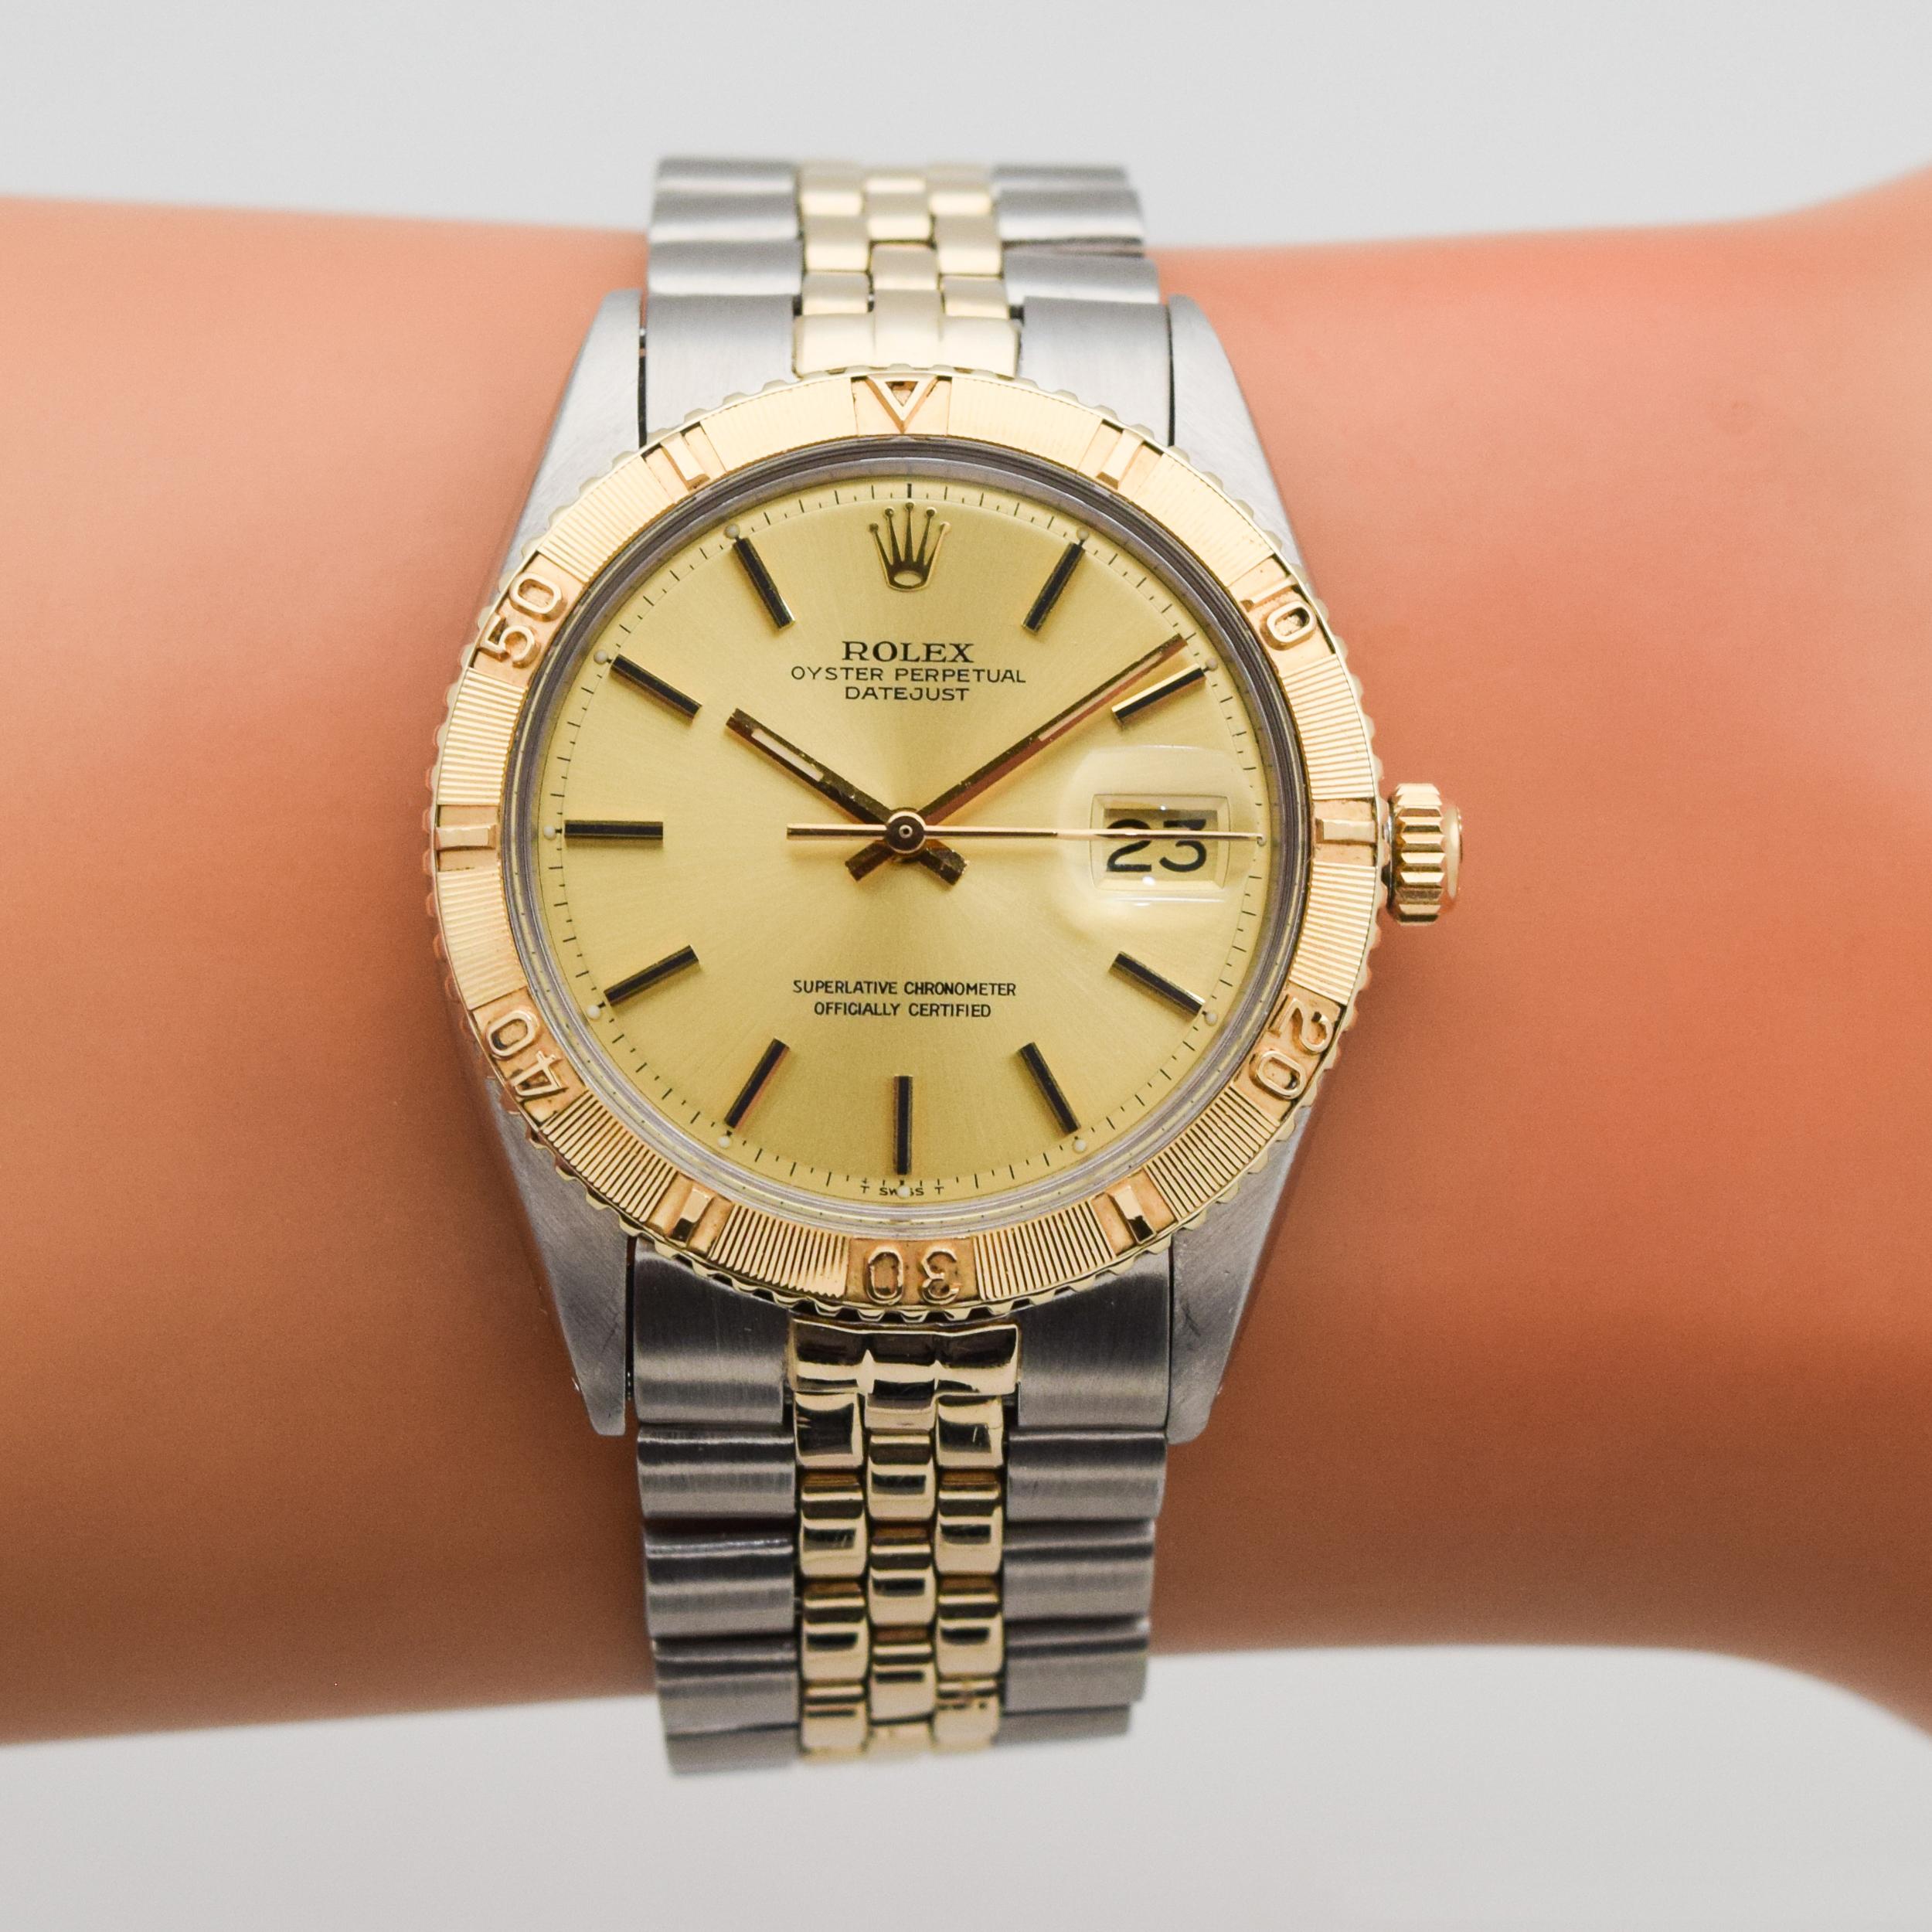 Vintage Rolex Thunderbird Datejust Two-Tone Watch, 1977 For Sale 1